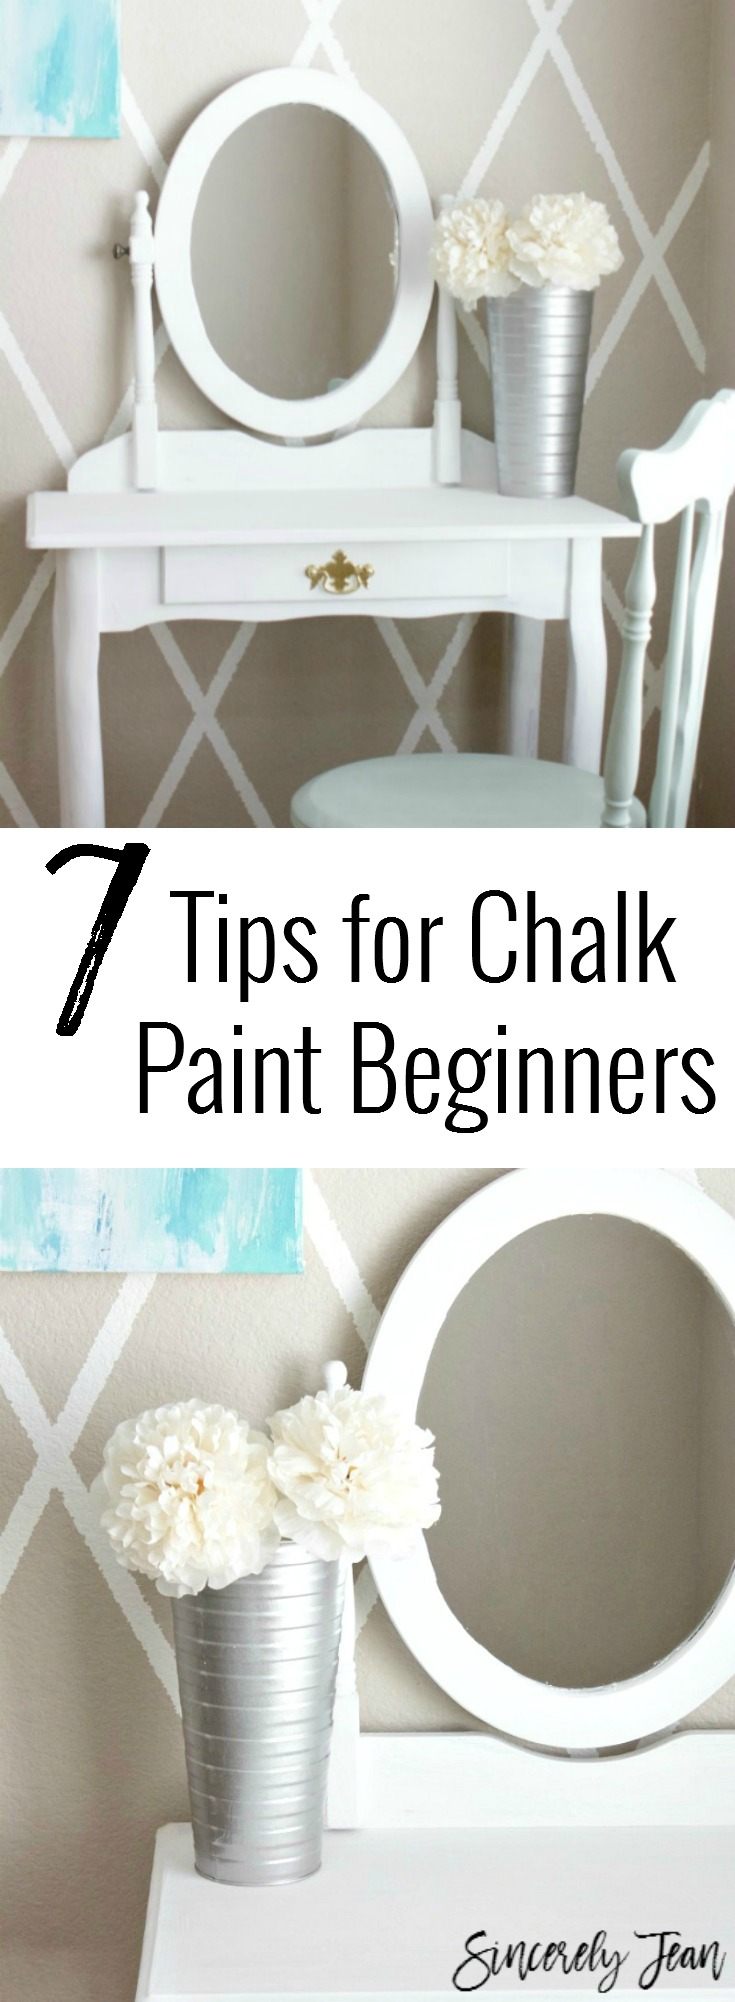 Tips for Chalk Paint Beginners - Vanity makeover | www.SincerelyJean.com